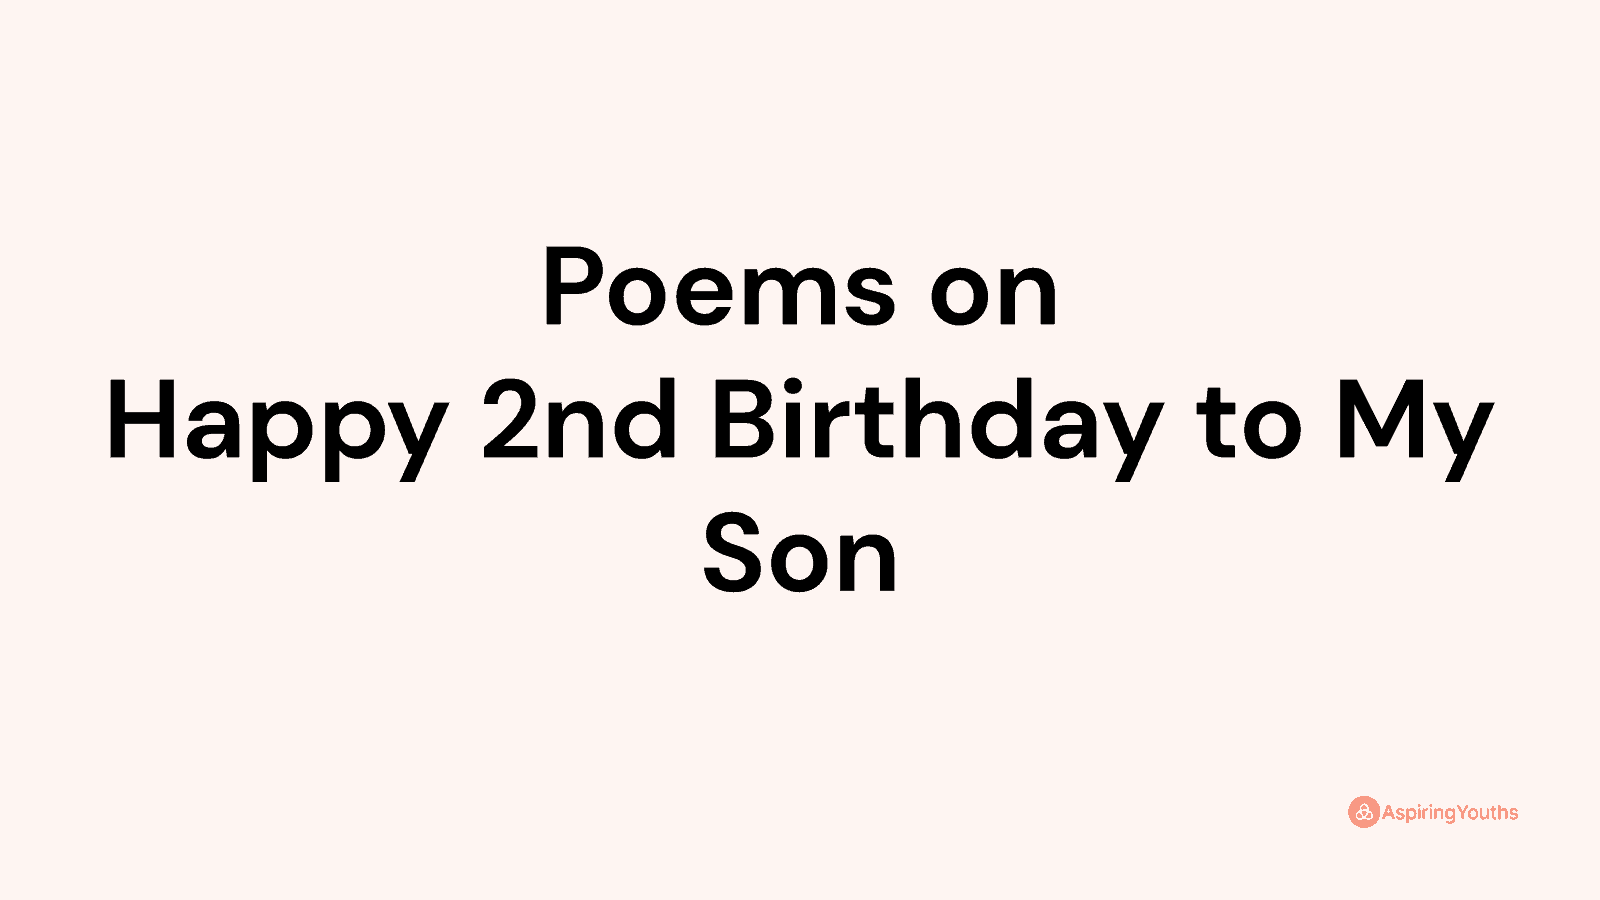 Poems on Happy 2nd Birthday to My Son